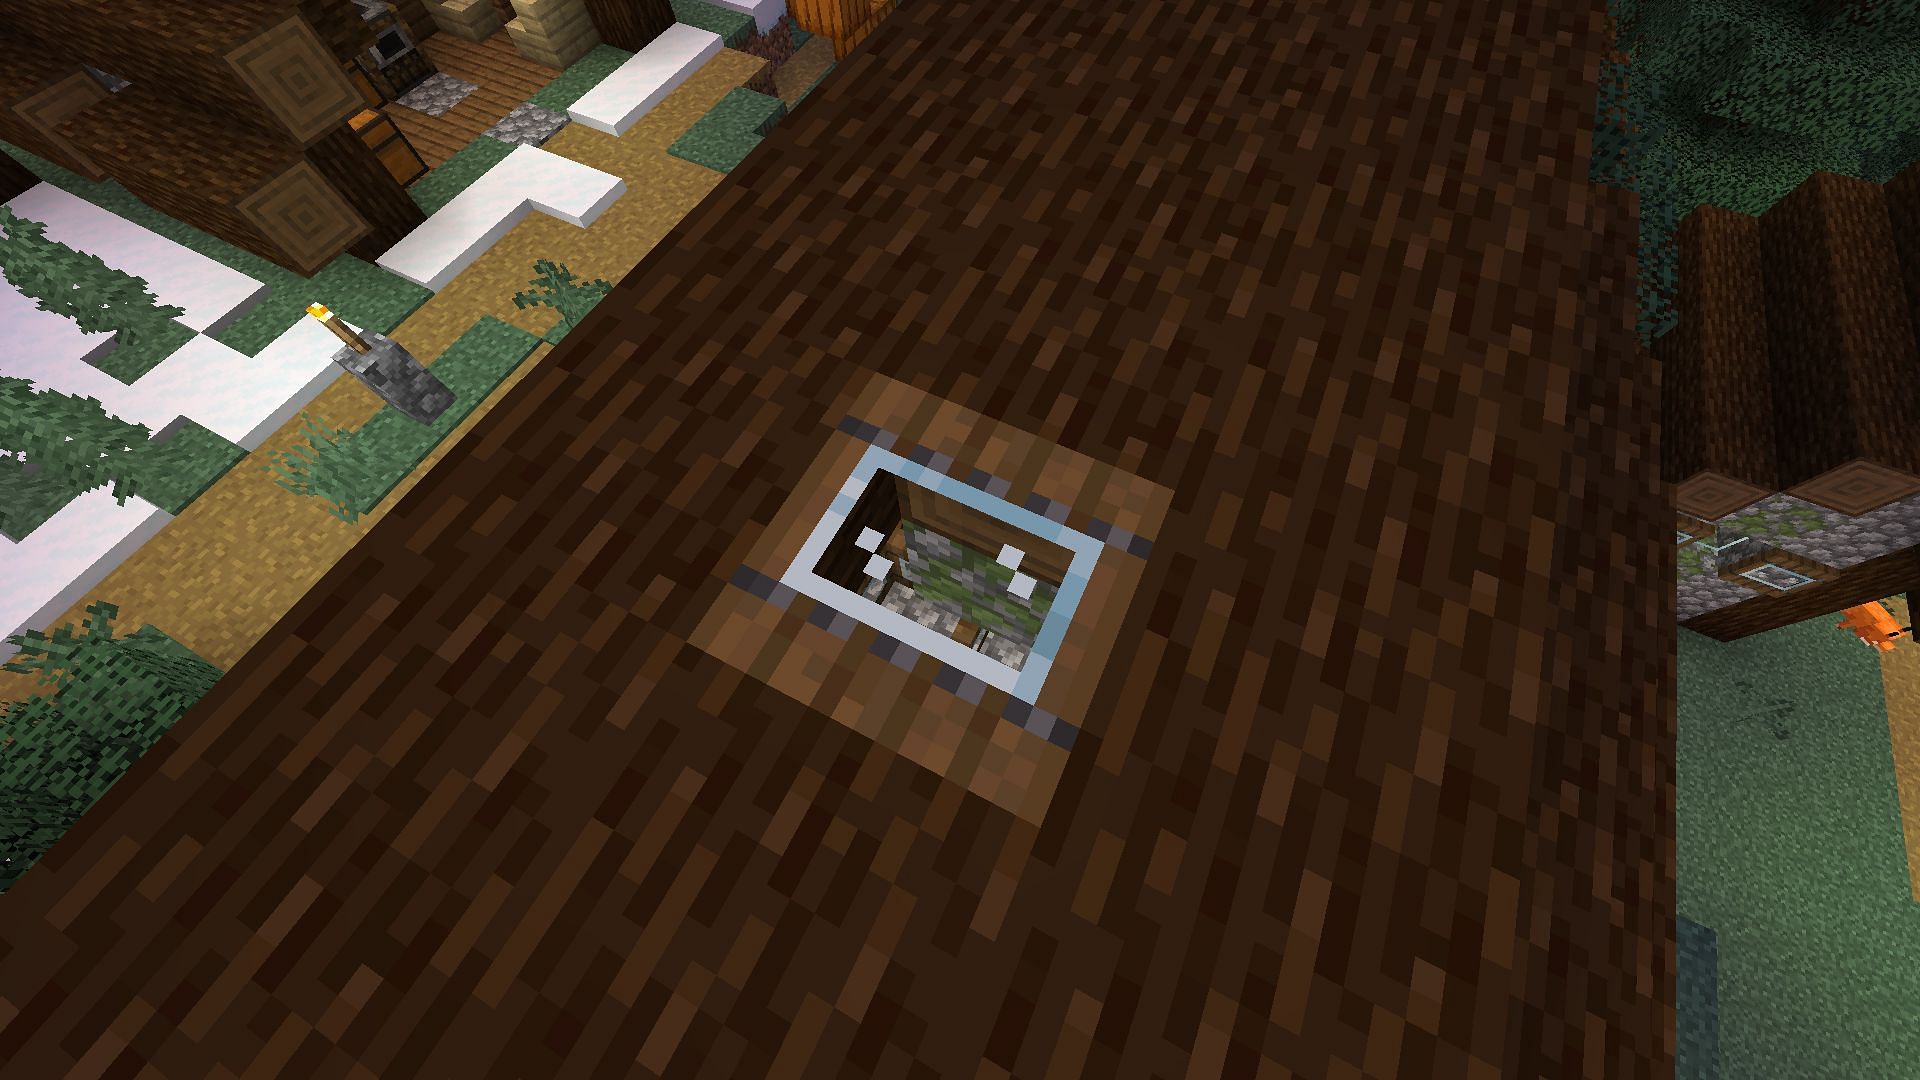 The Glass Trapdoors resource pack in Minecraft (Image via Mojang)